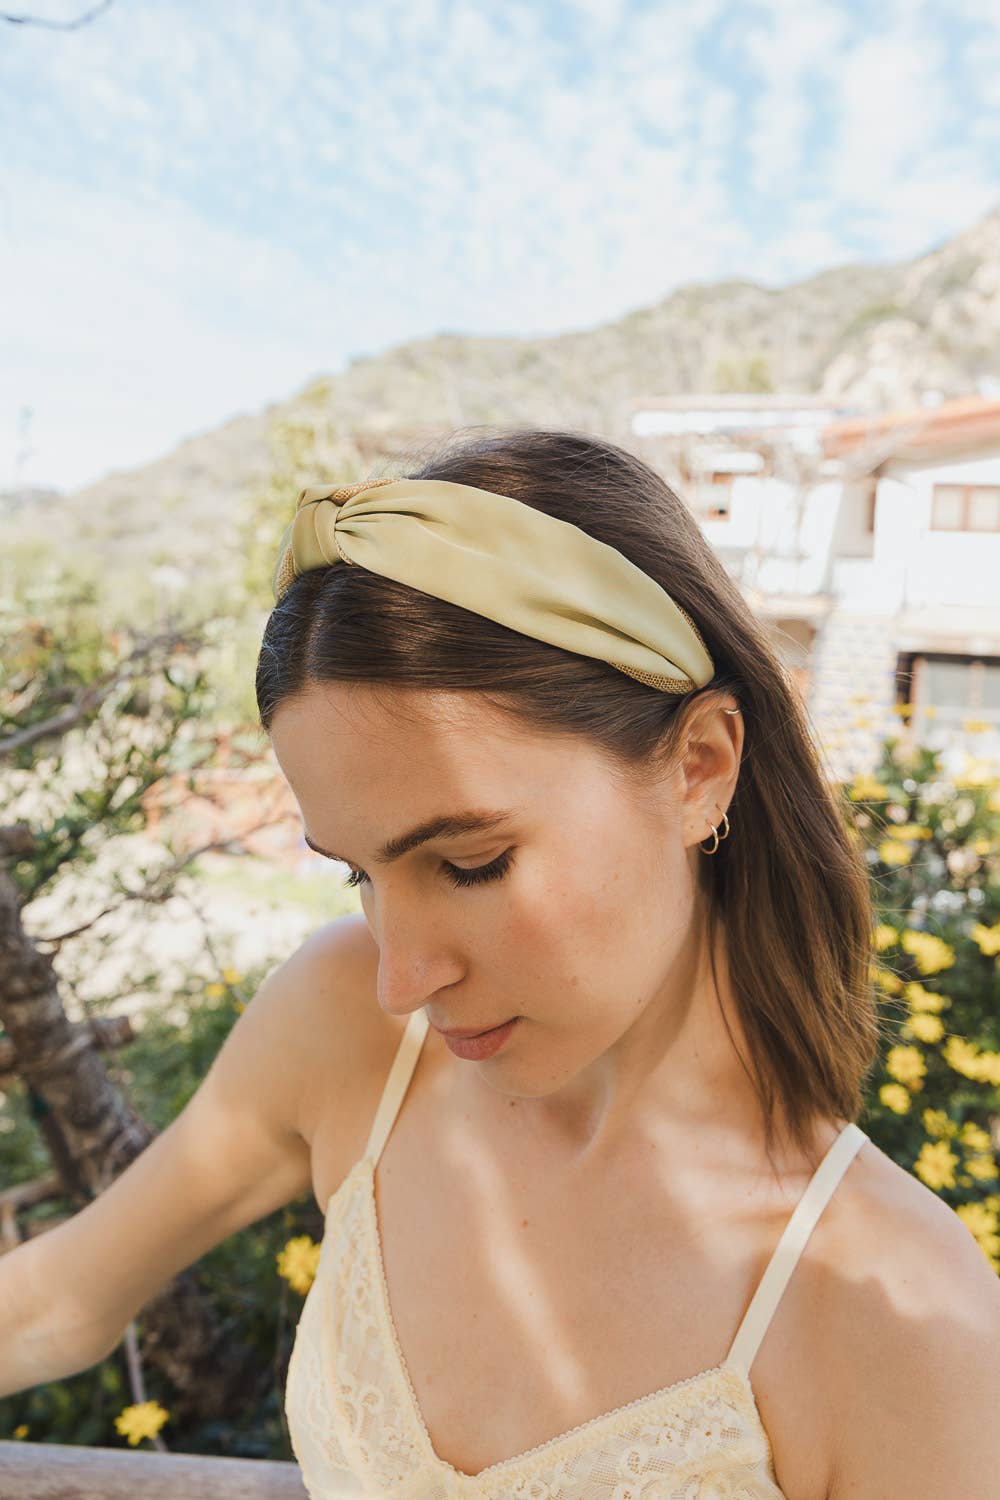 Basic Woven Top Knot Headband in Sage